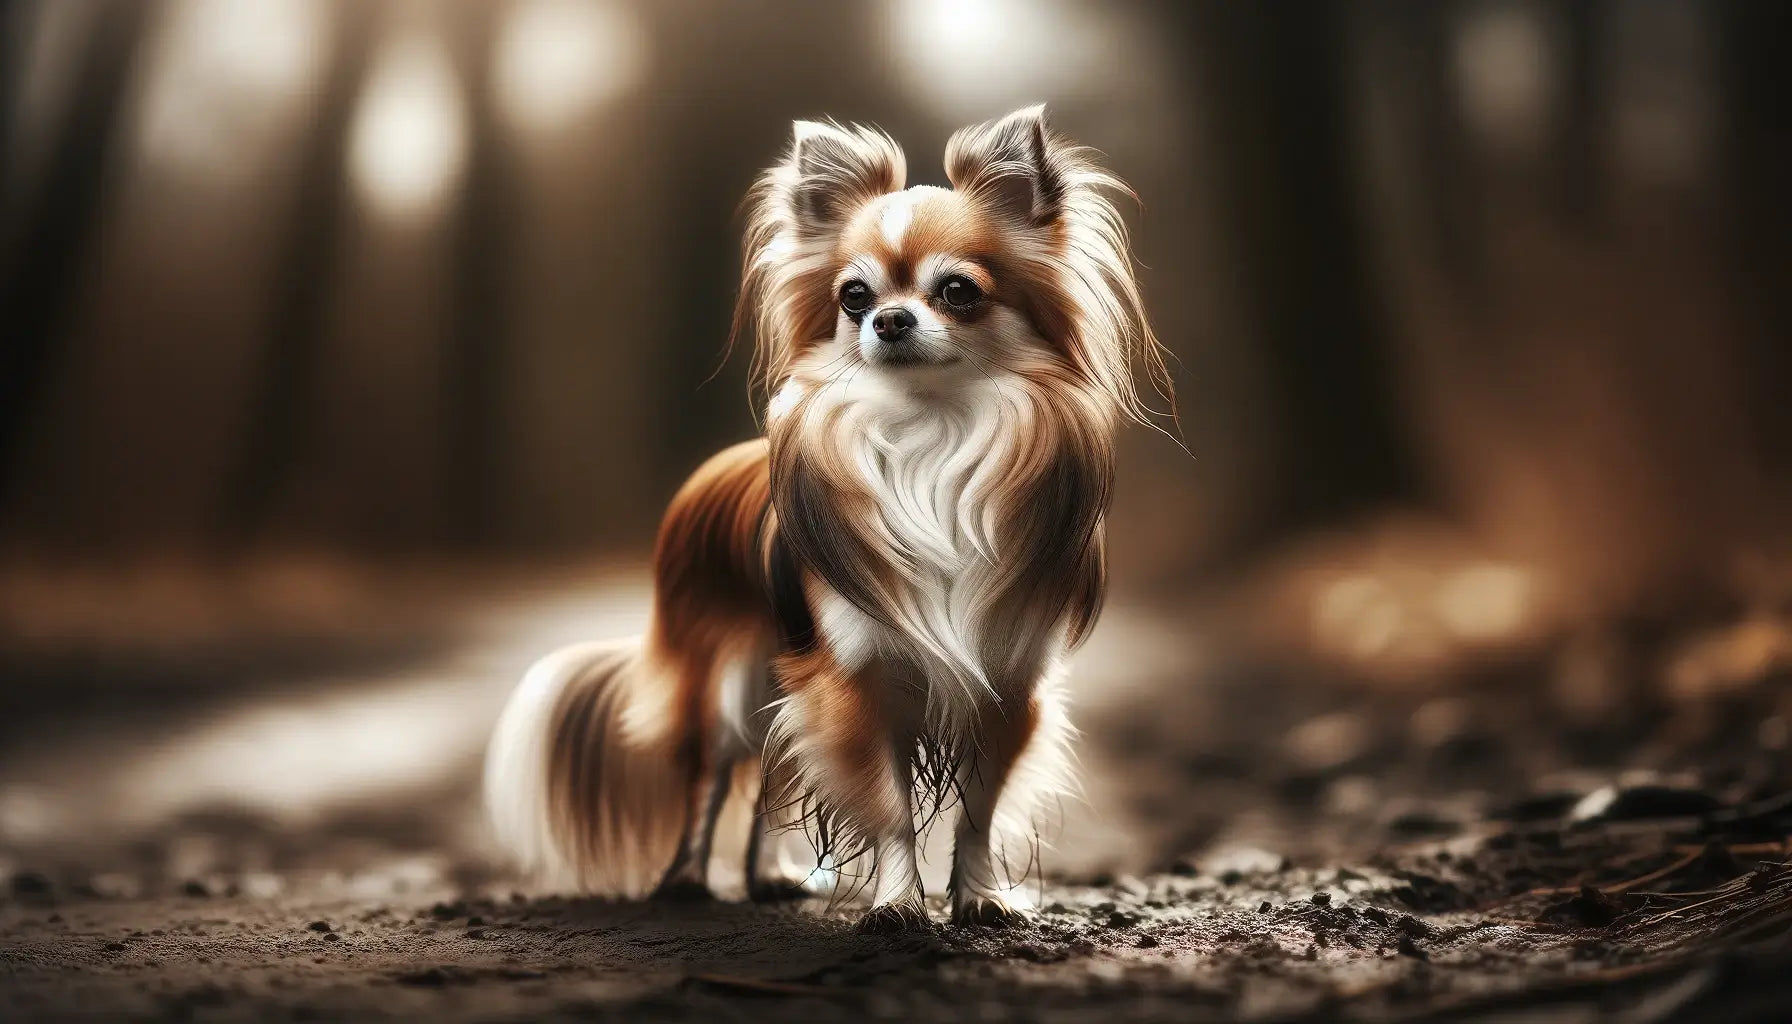 Long-Haired Chihuahua stands confidently on a muddy path. Its sleek coat glistens in shades of light brown and white.